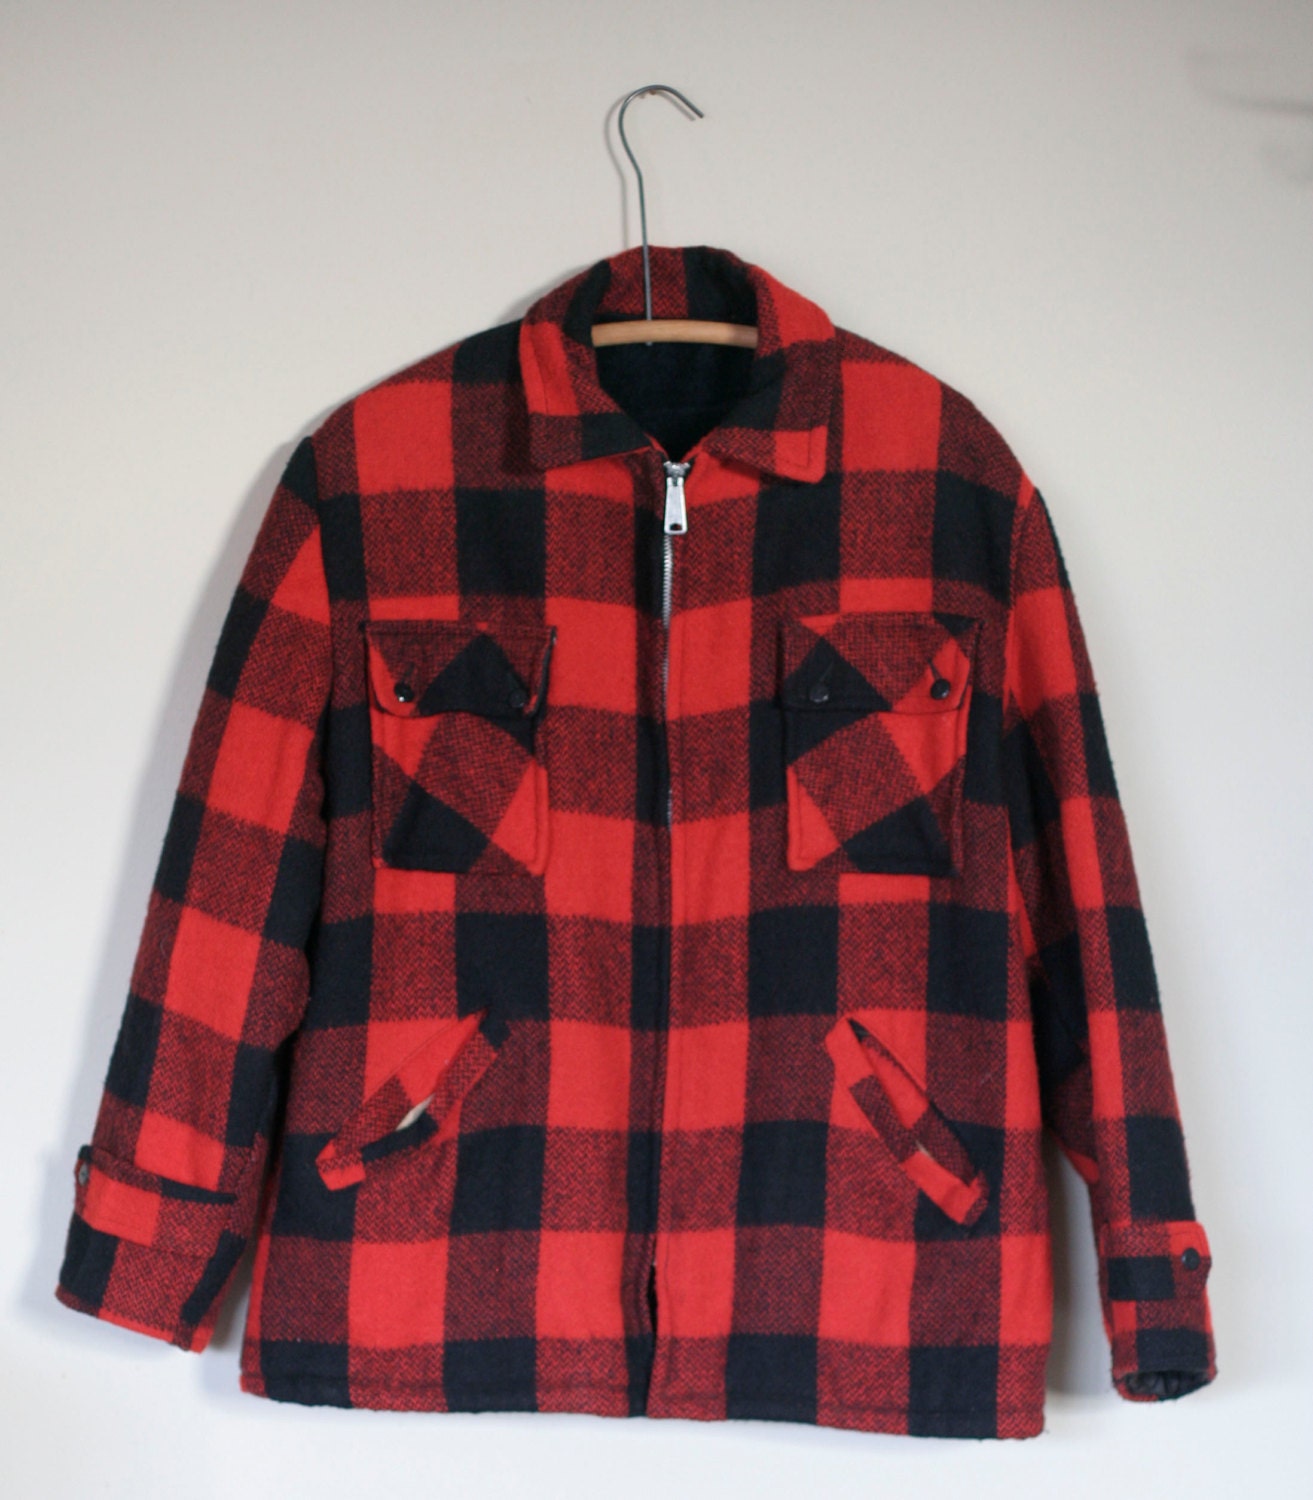 vintage wool red and black buffalo check winter jacket size M